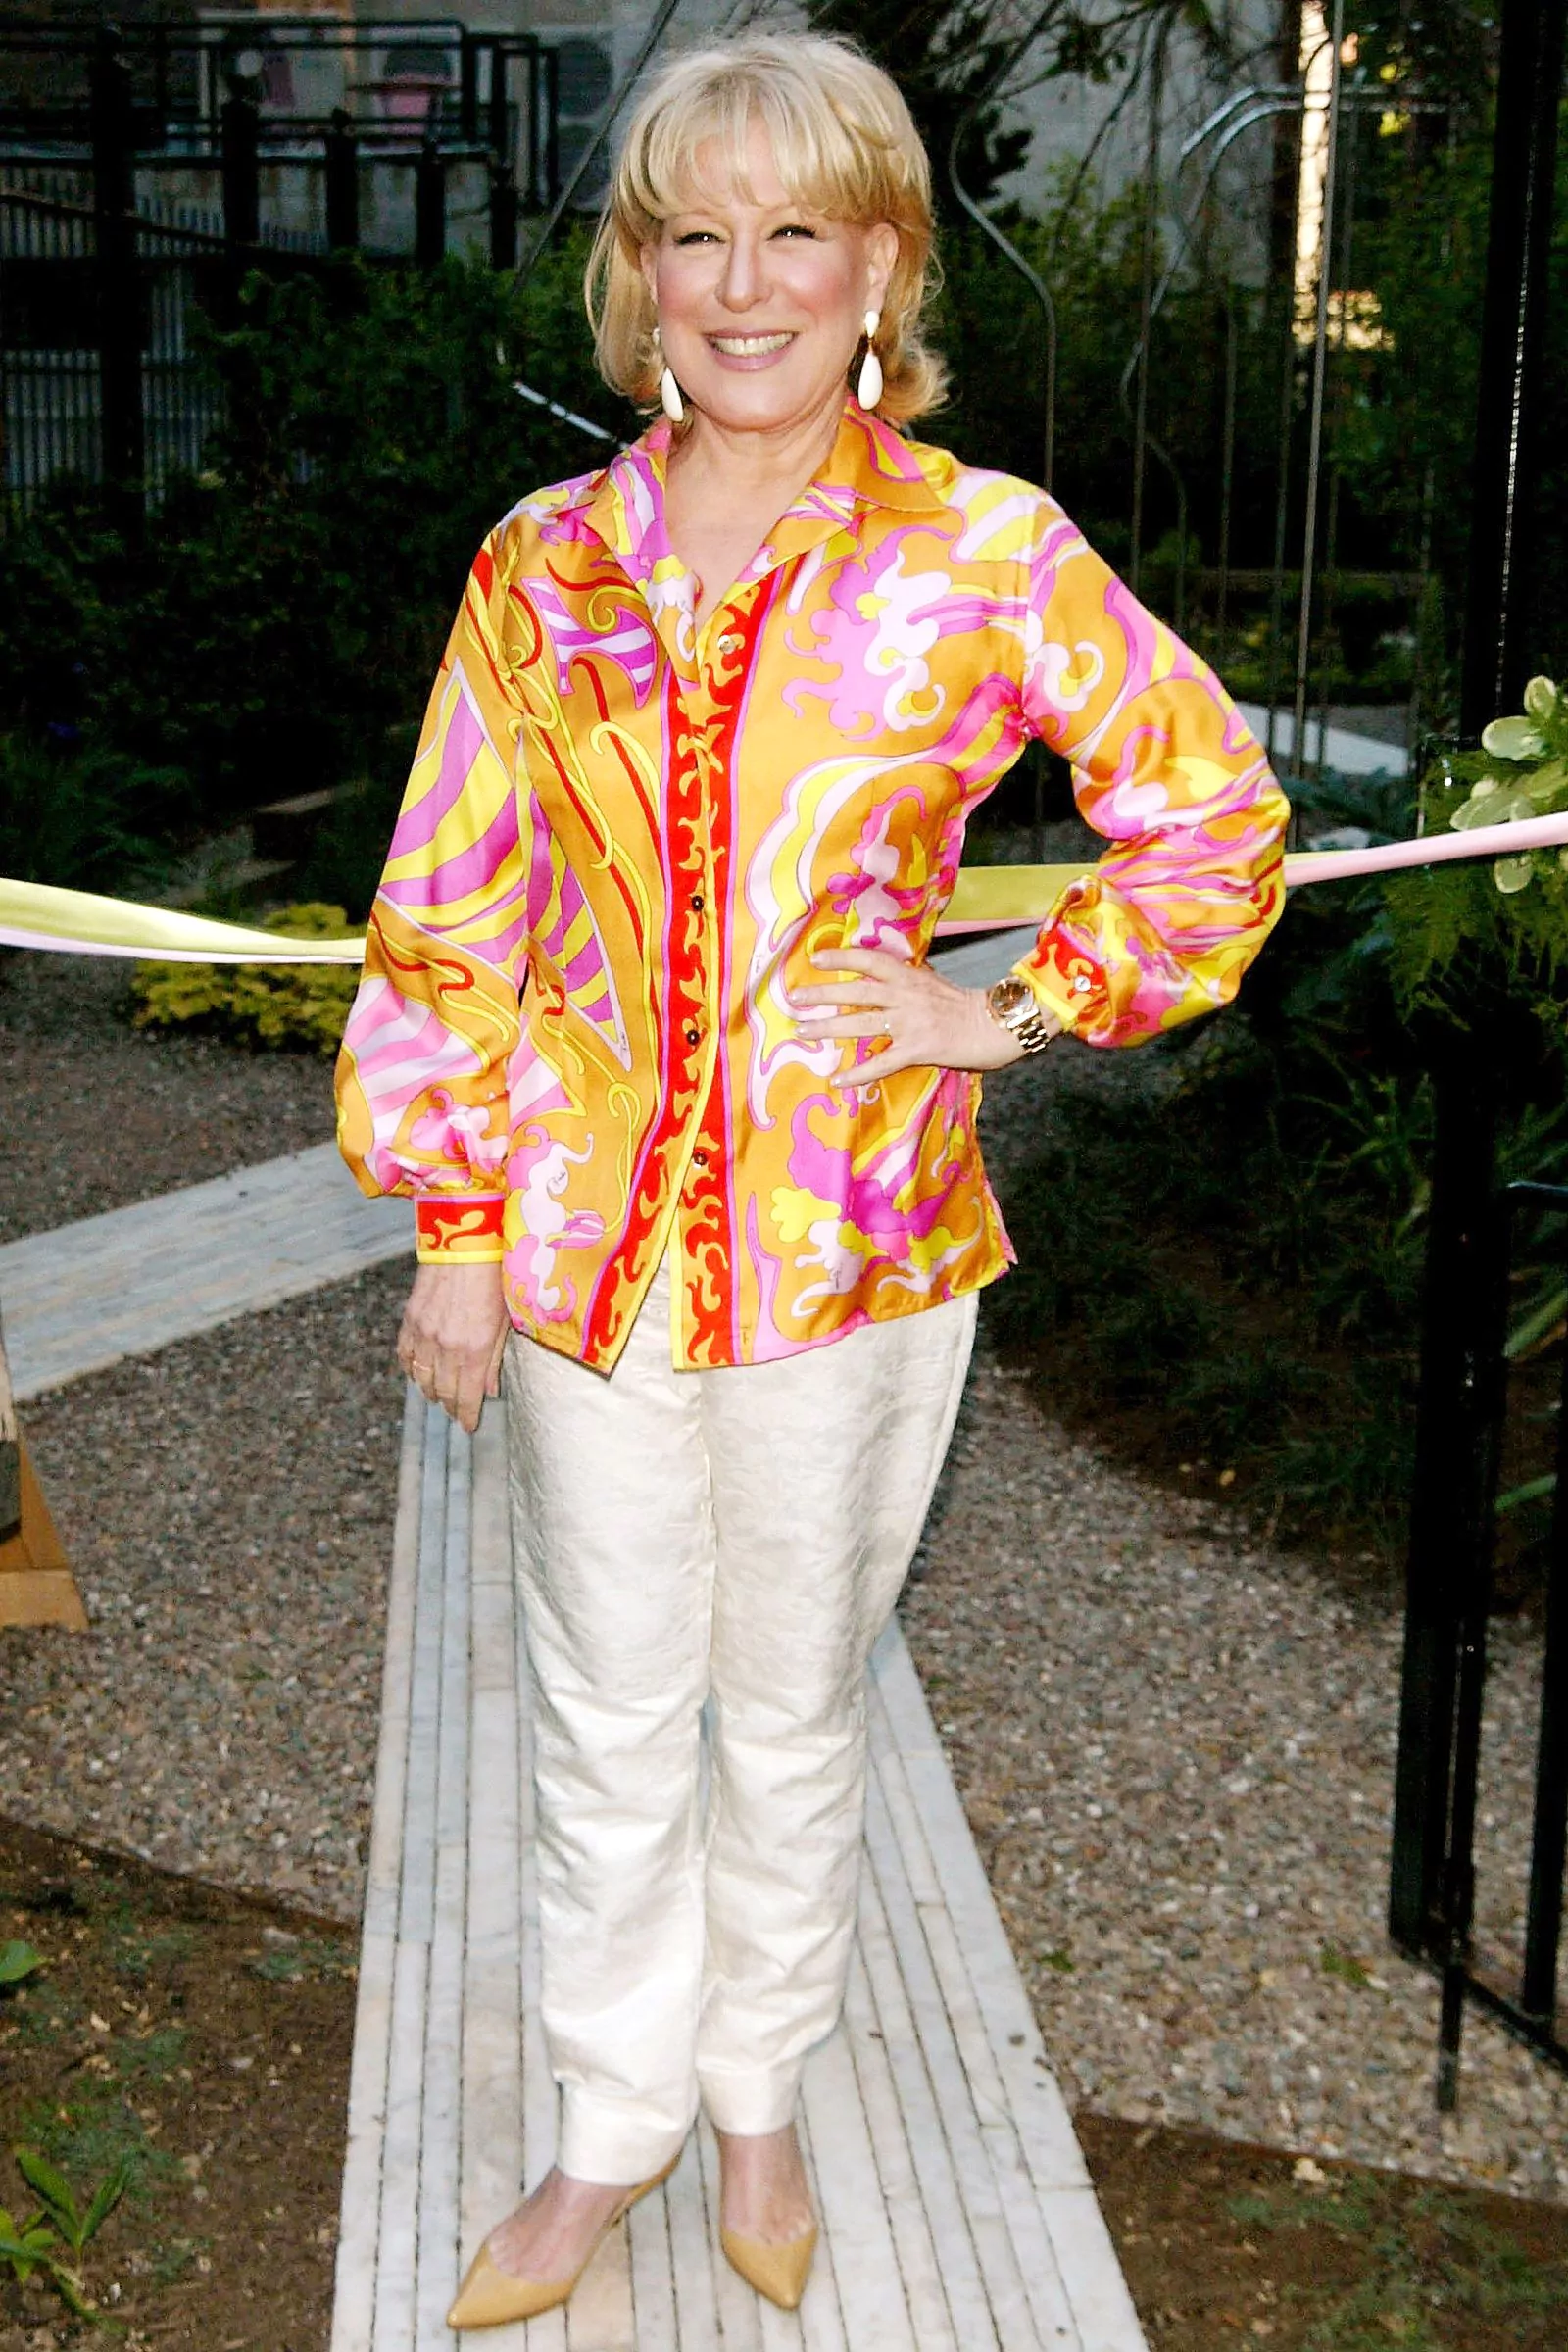 Bette Midler at the 7th Annual Spring Picnic in New York City on May 19, 2008.